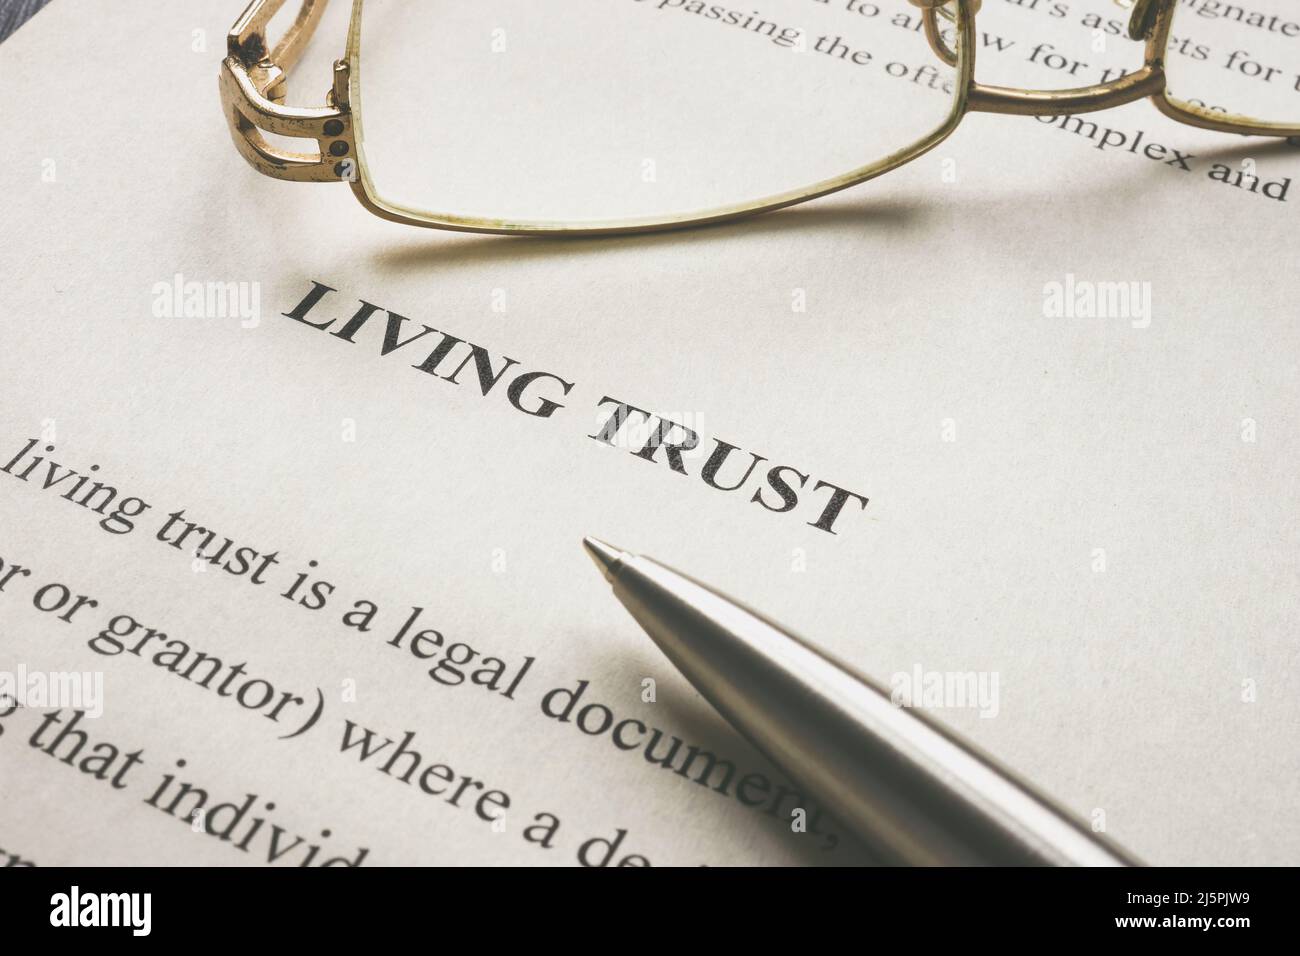 Info about Living trust and glasses on it. Stock Photo